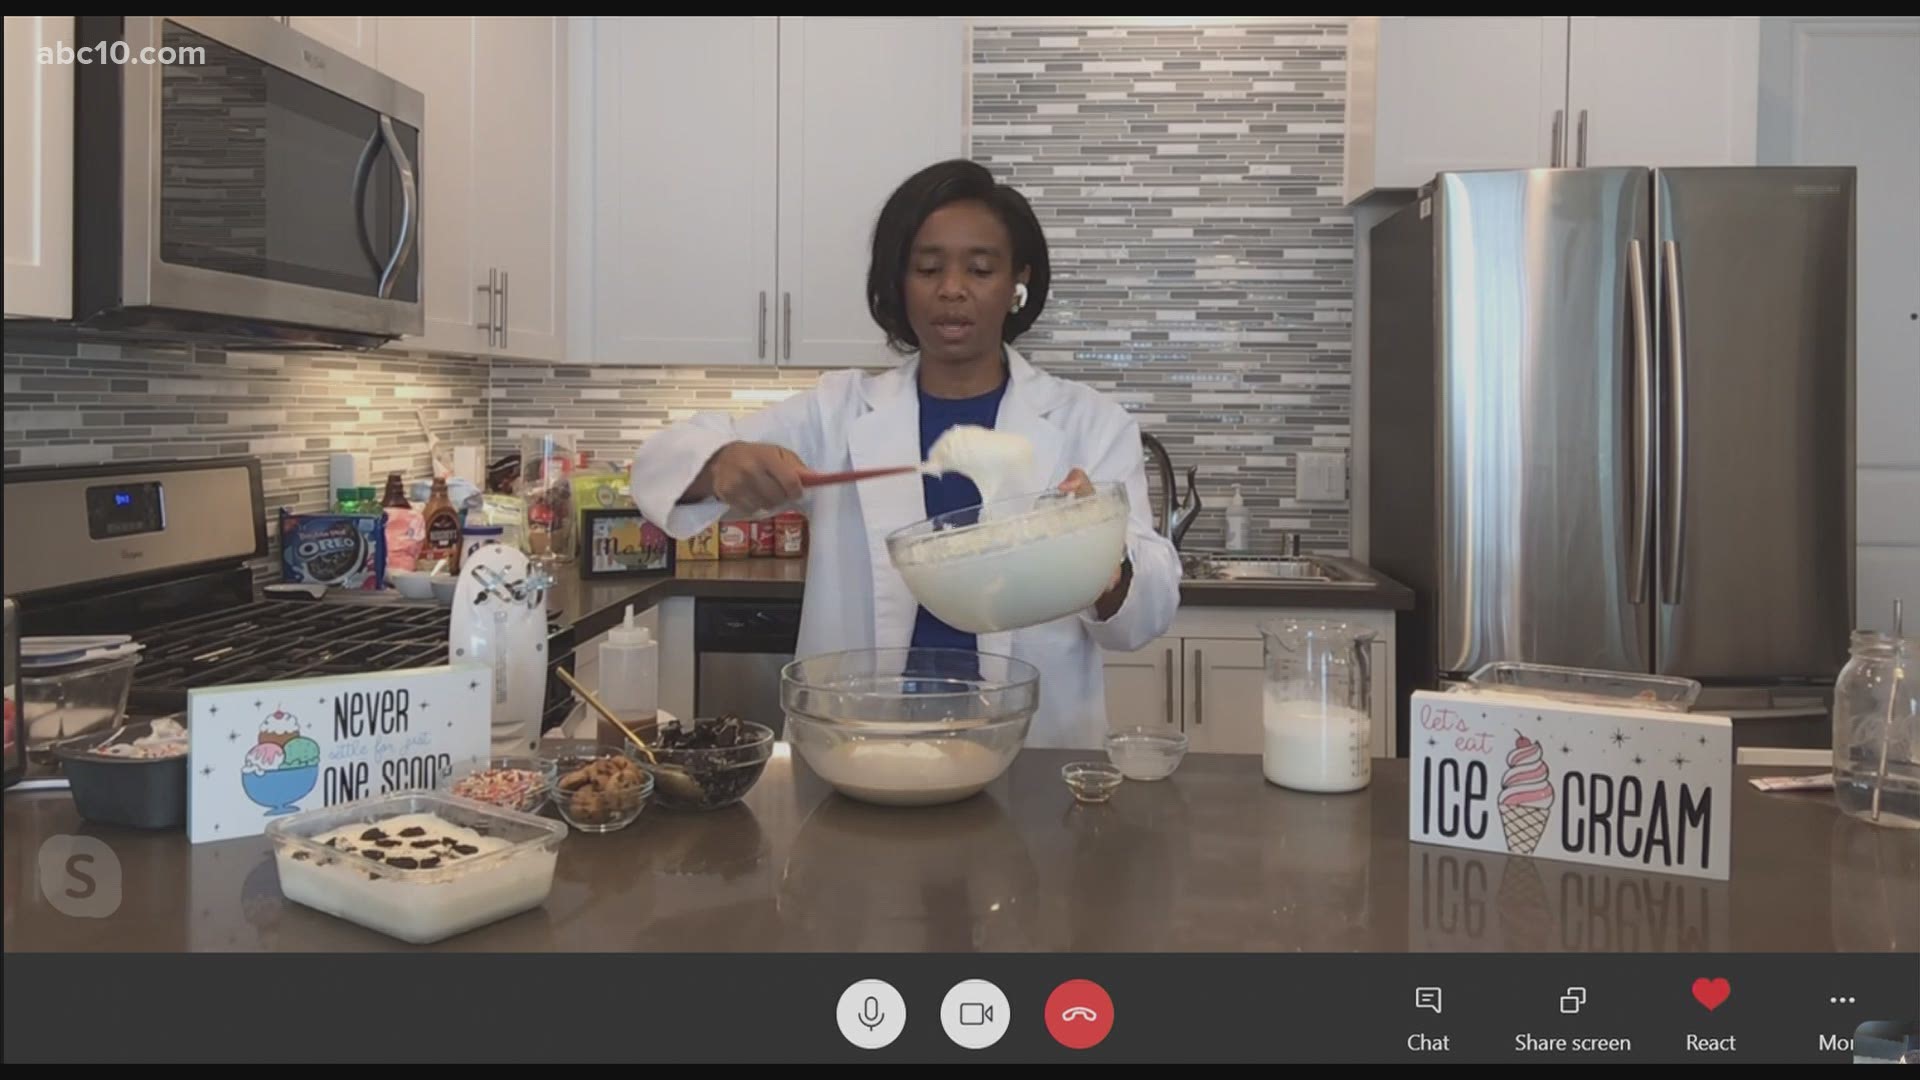 Dr. Maya aka the "Ice Cream Doctor" shares her easy no churn cookies 'n cream ice cream recipe that the whole family can enjoy making from scratch at home.